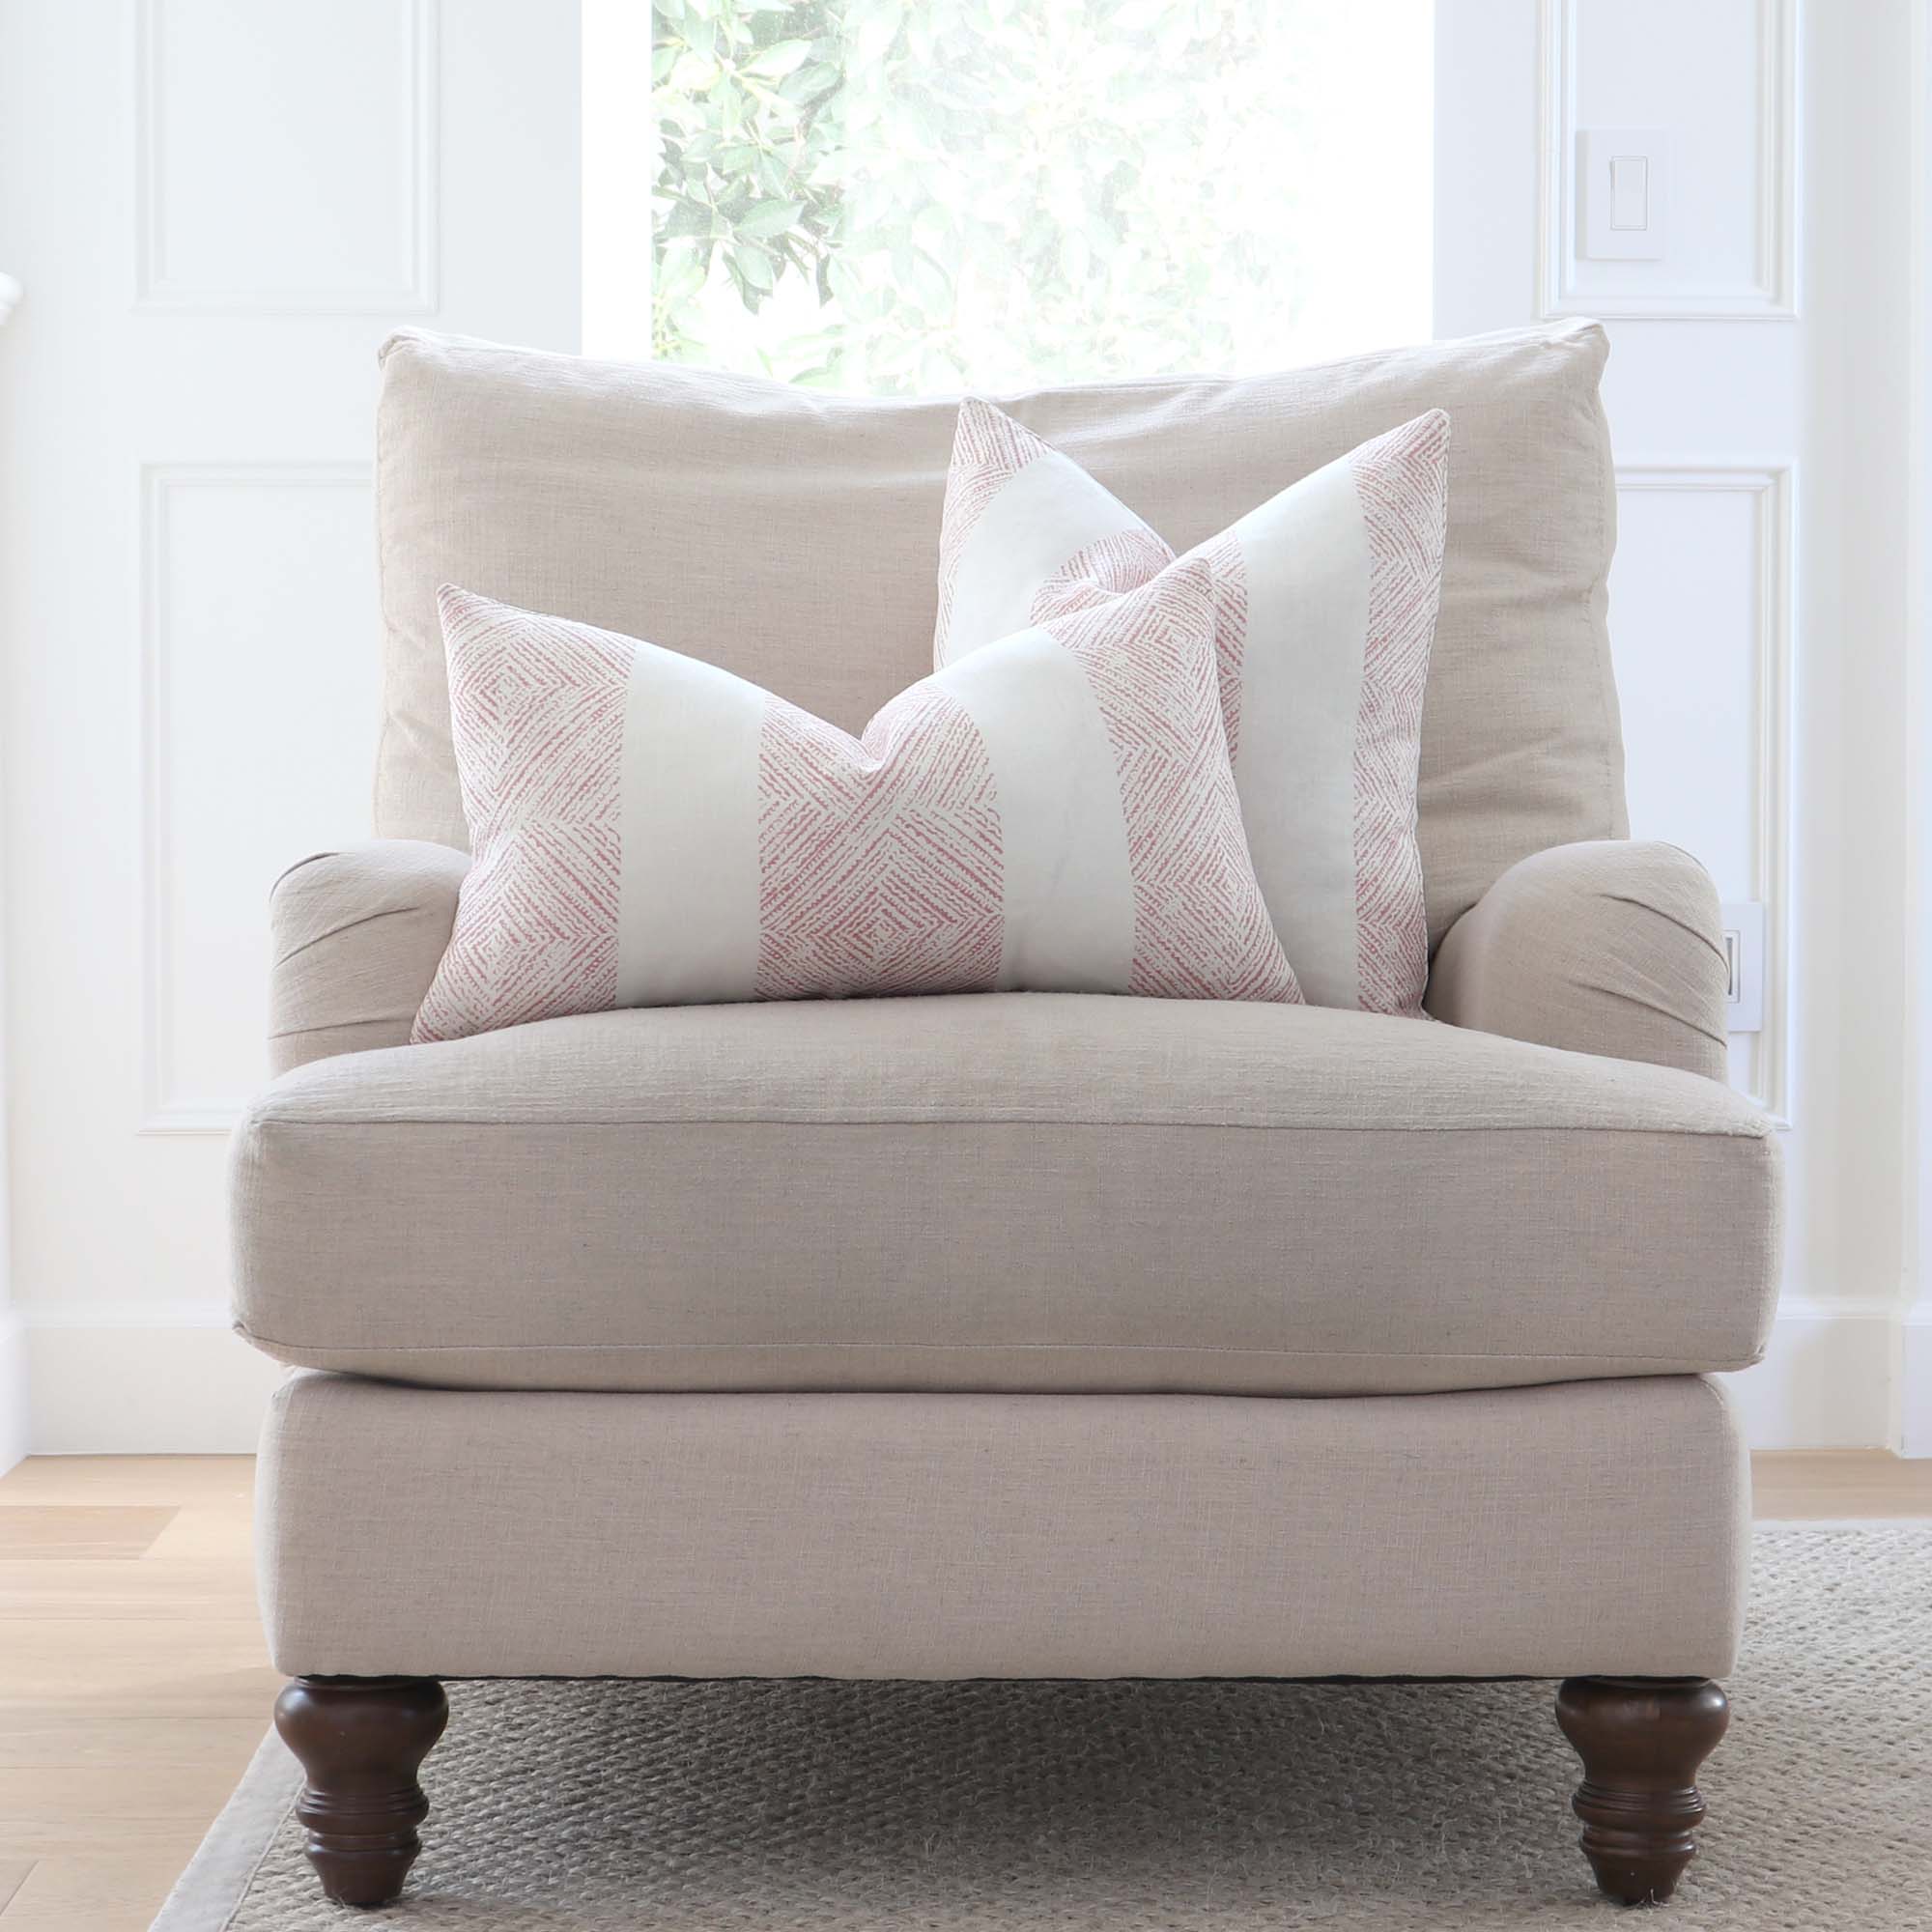 https://www.chloeandolive.com/cdn/shop/products/thibaut-clipperton-stripe-blush-pink-block-print-designer-luxury-throw-pillow-cover-on-accent-chair-in-living-room-decor_5000x.jpg?v=1645593535